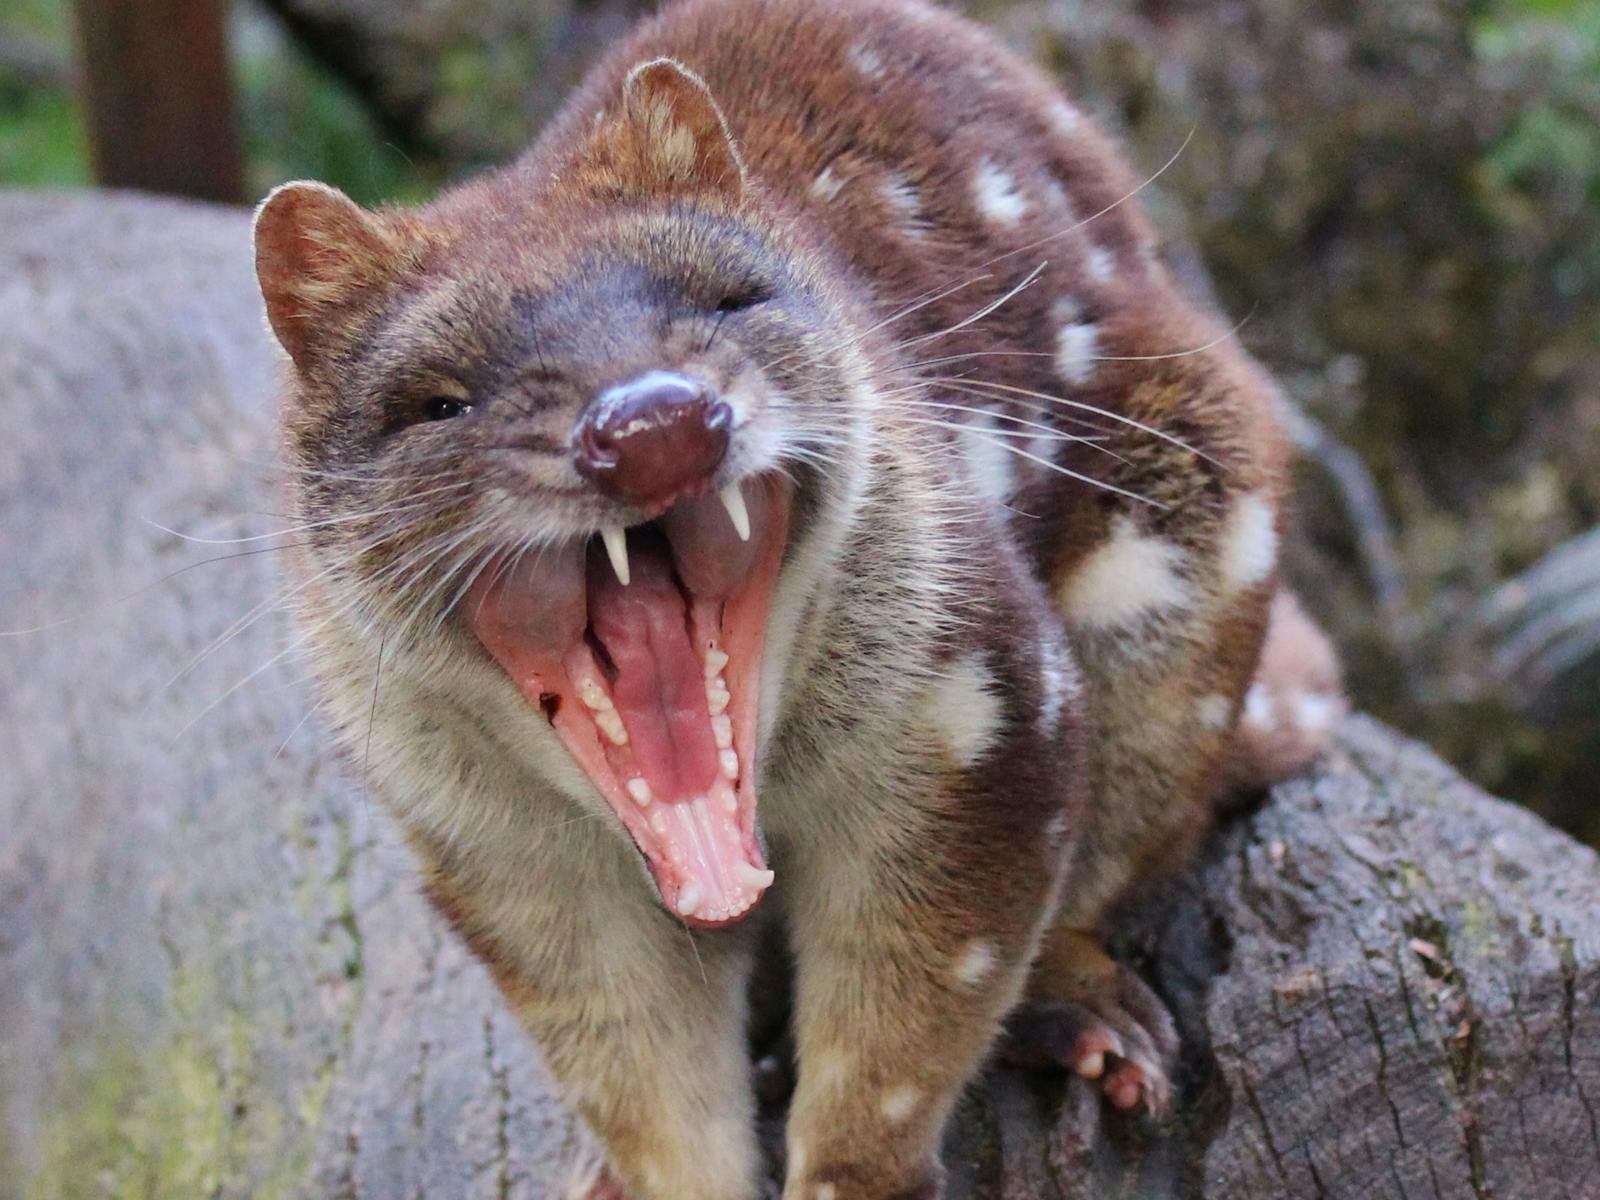 Spotted-tailed quoll